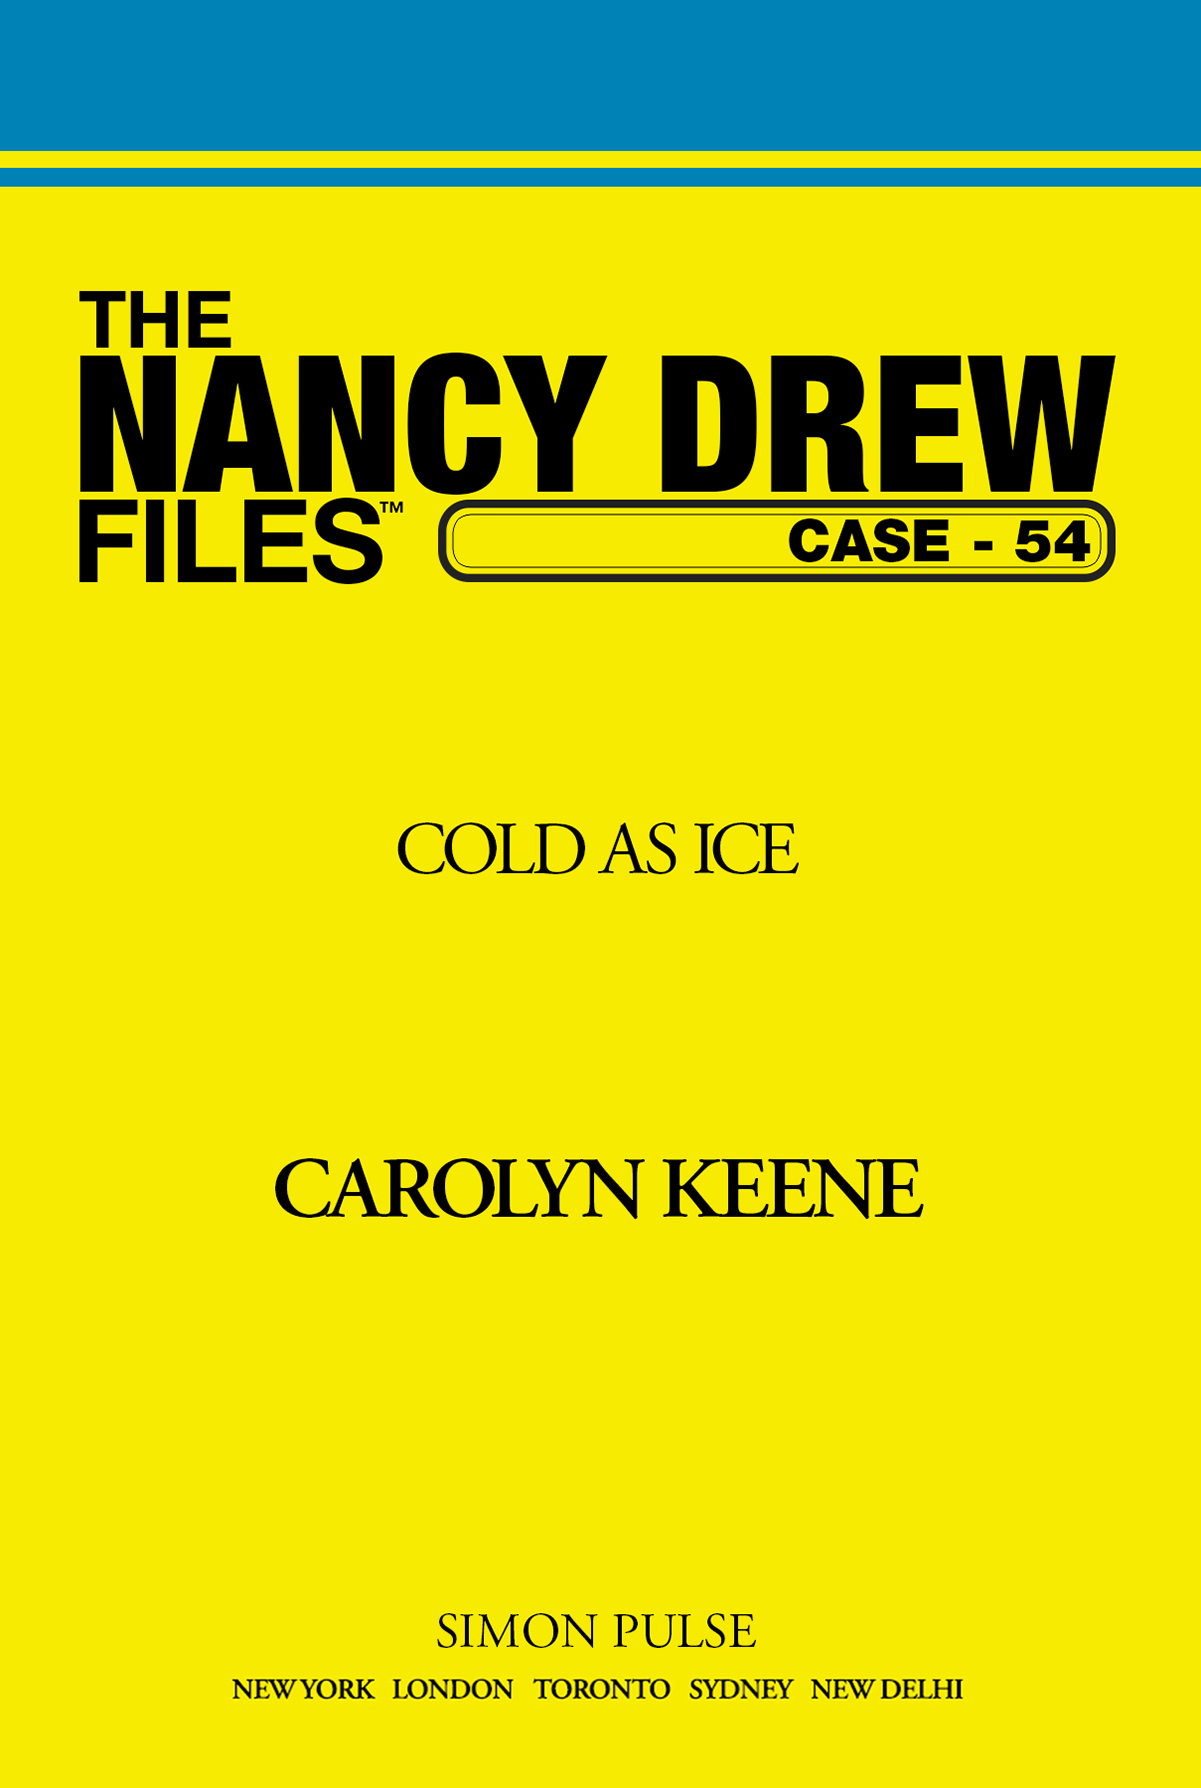 Cold as Ice by Carolyn Keene